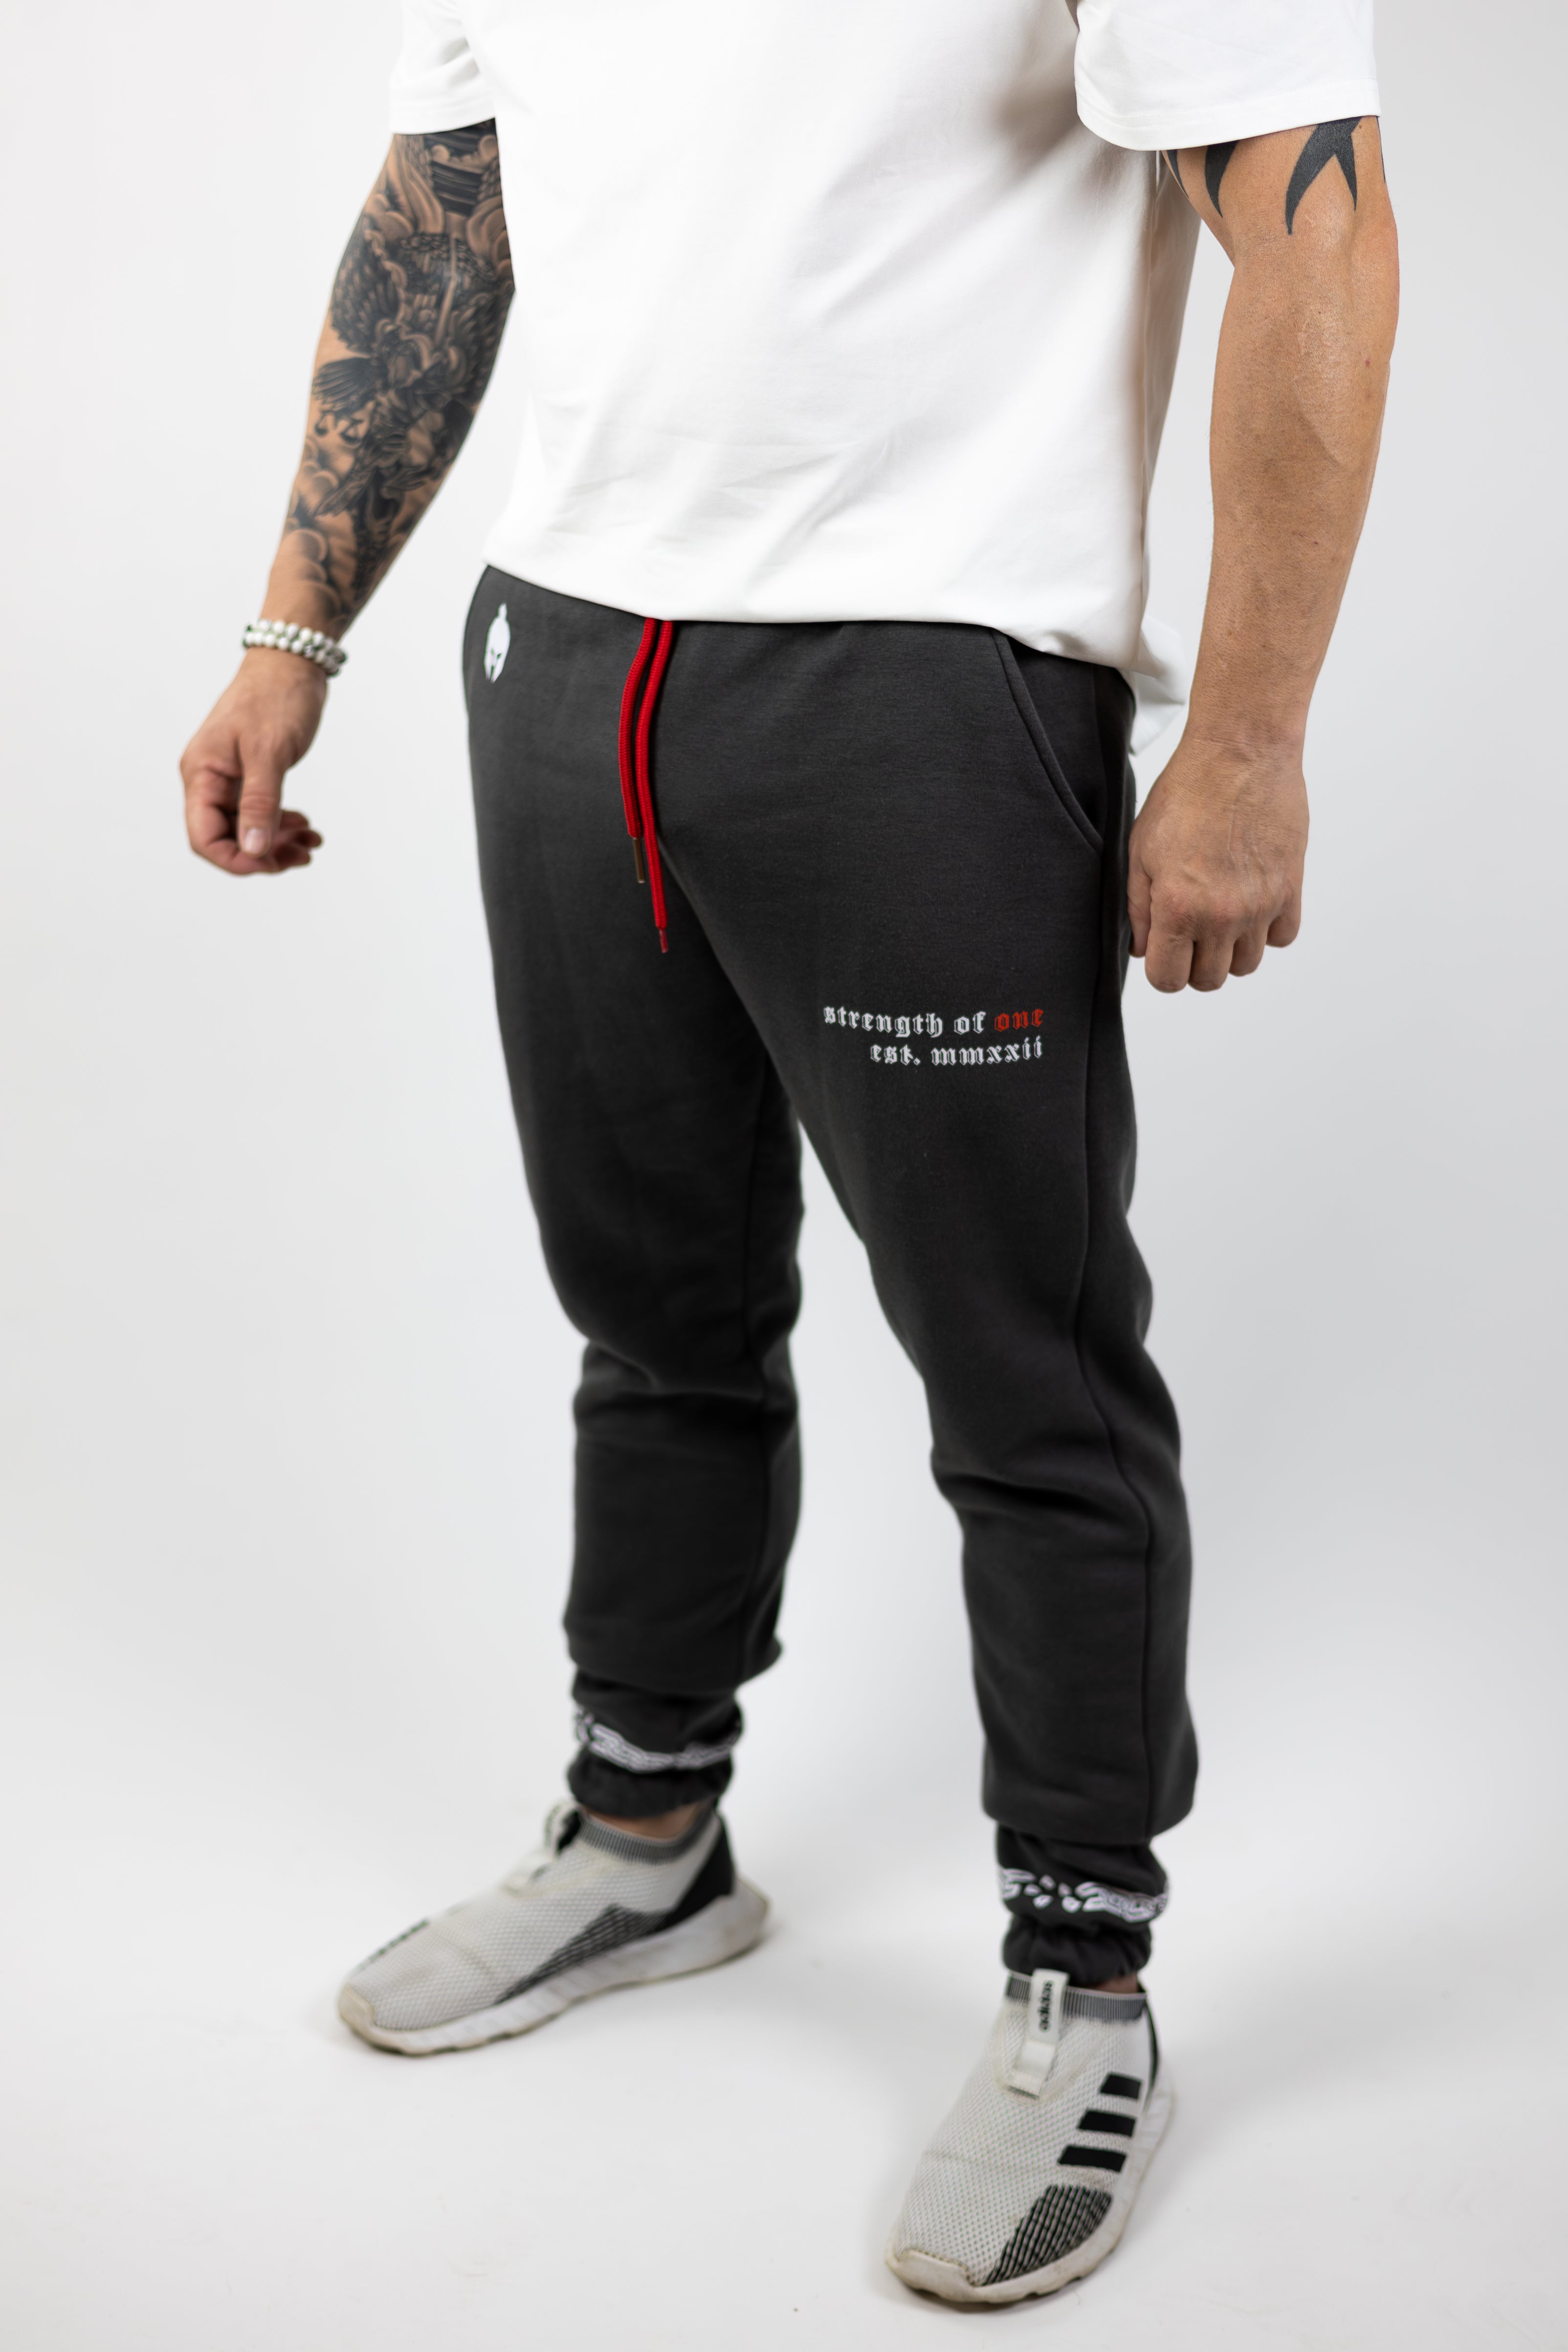 man wearing gray Strength of One gym sweatpants with warrior helmet logo on top left hip and Strength of One logo on right hip with red drawstrings coming out of pants